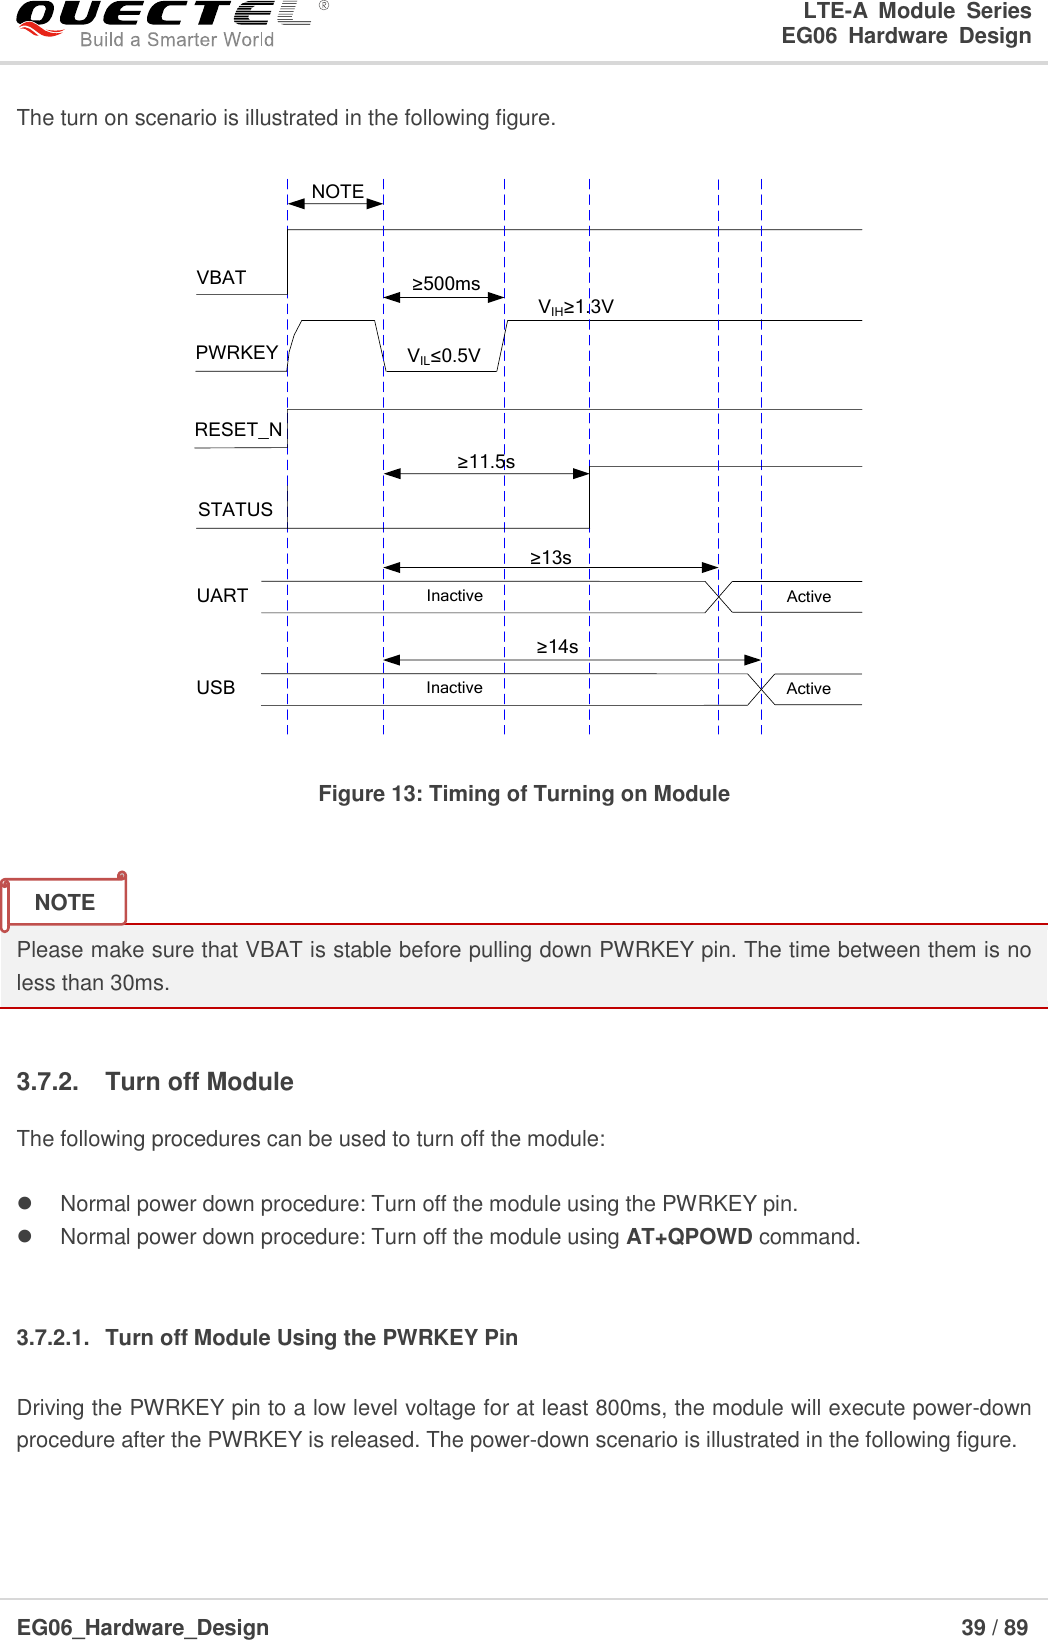 LTE-A  Module  Series                                                  EG06  Hardware  Design  EG06_Hardware_Design                                                               39 / 89    The turn on scenario is illustrated in the following figure. VIL≤0.5VVIH≥1.3VVBATPWRKEY≥500msRESET_NSTATUSInactive ActiveUARTNOTEInactive ActiveUSB≥11.5s≥13s≥14s Figure 13: Timing of Turning on Module   Please make sure that VBAT is stable before pulling down PWRKEY pin. The time between them is no less than 30ms.  3.7.2.  Turn off Module The following procedures can be used to turn off the module:    Normal power down procedure: Turn off the module using the PWRKEY pin.   Normal power down procedure: Turn off the module using AT+QPOWD command.  3.7.2.1.  Turn off Module Using the PWRKEY Pin Driving the PWRKEY pin to a low level voltage for at least 800ms, the module will execute power-down procedure after the PWRKEY is released. The power-down scenario is illustrated in the following figure. NOTE 